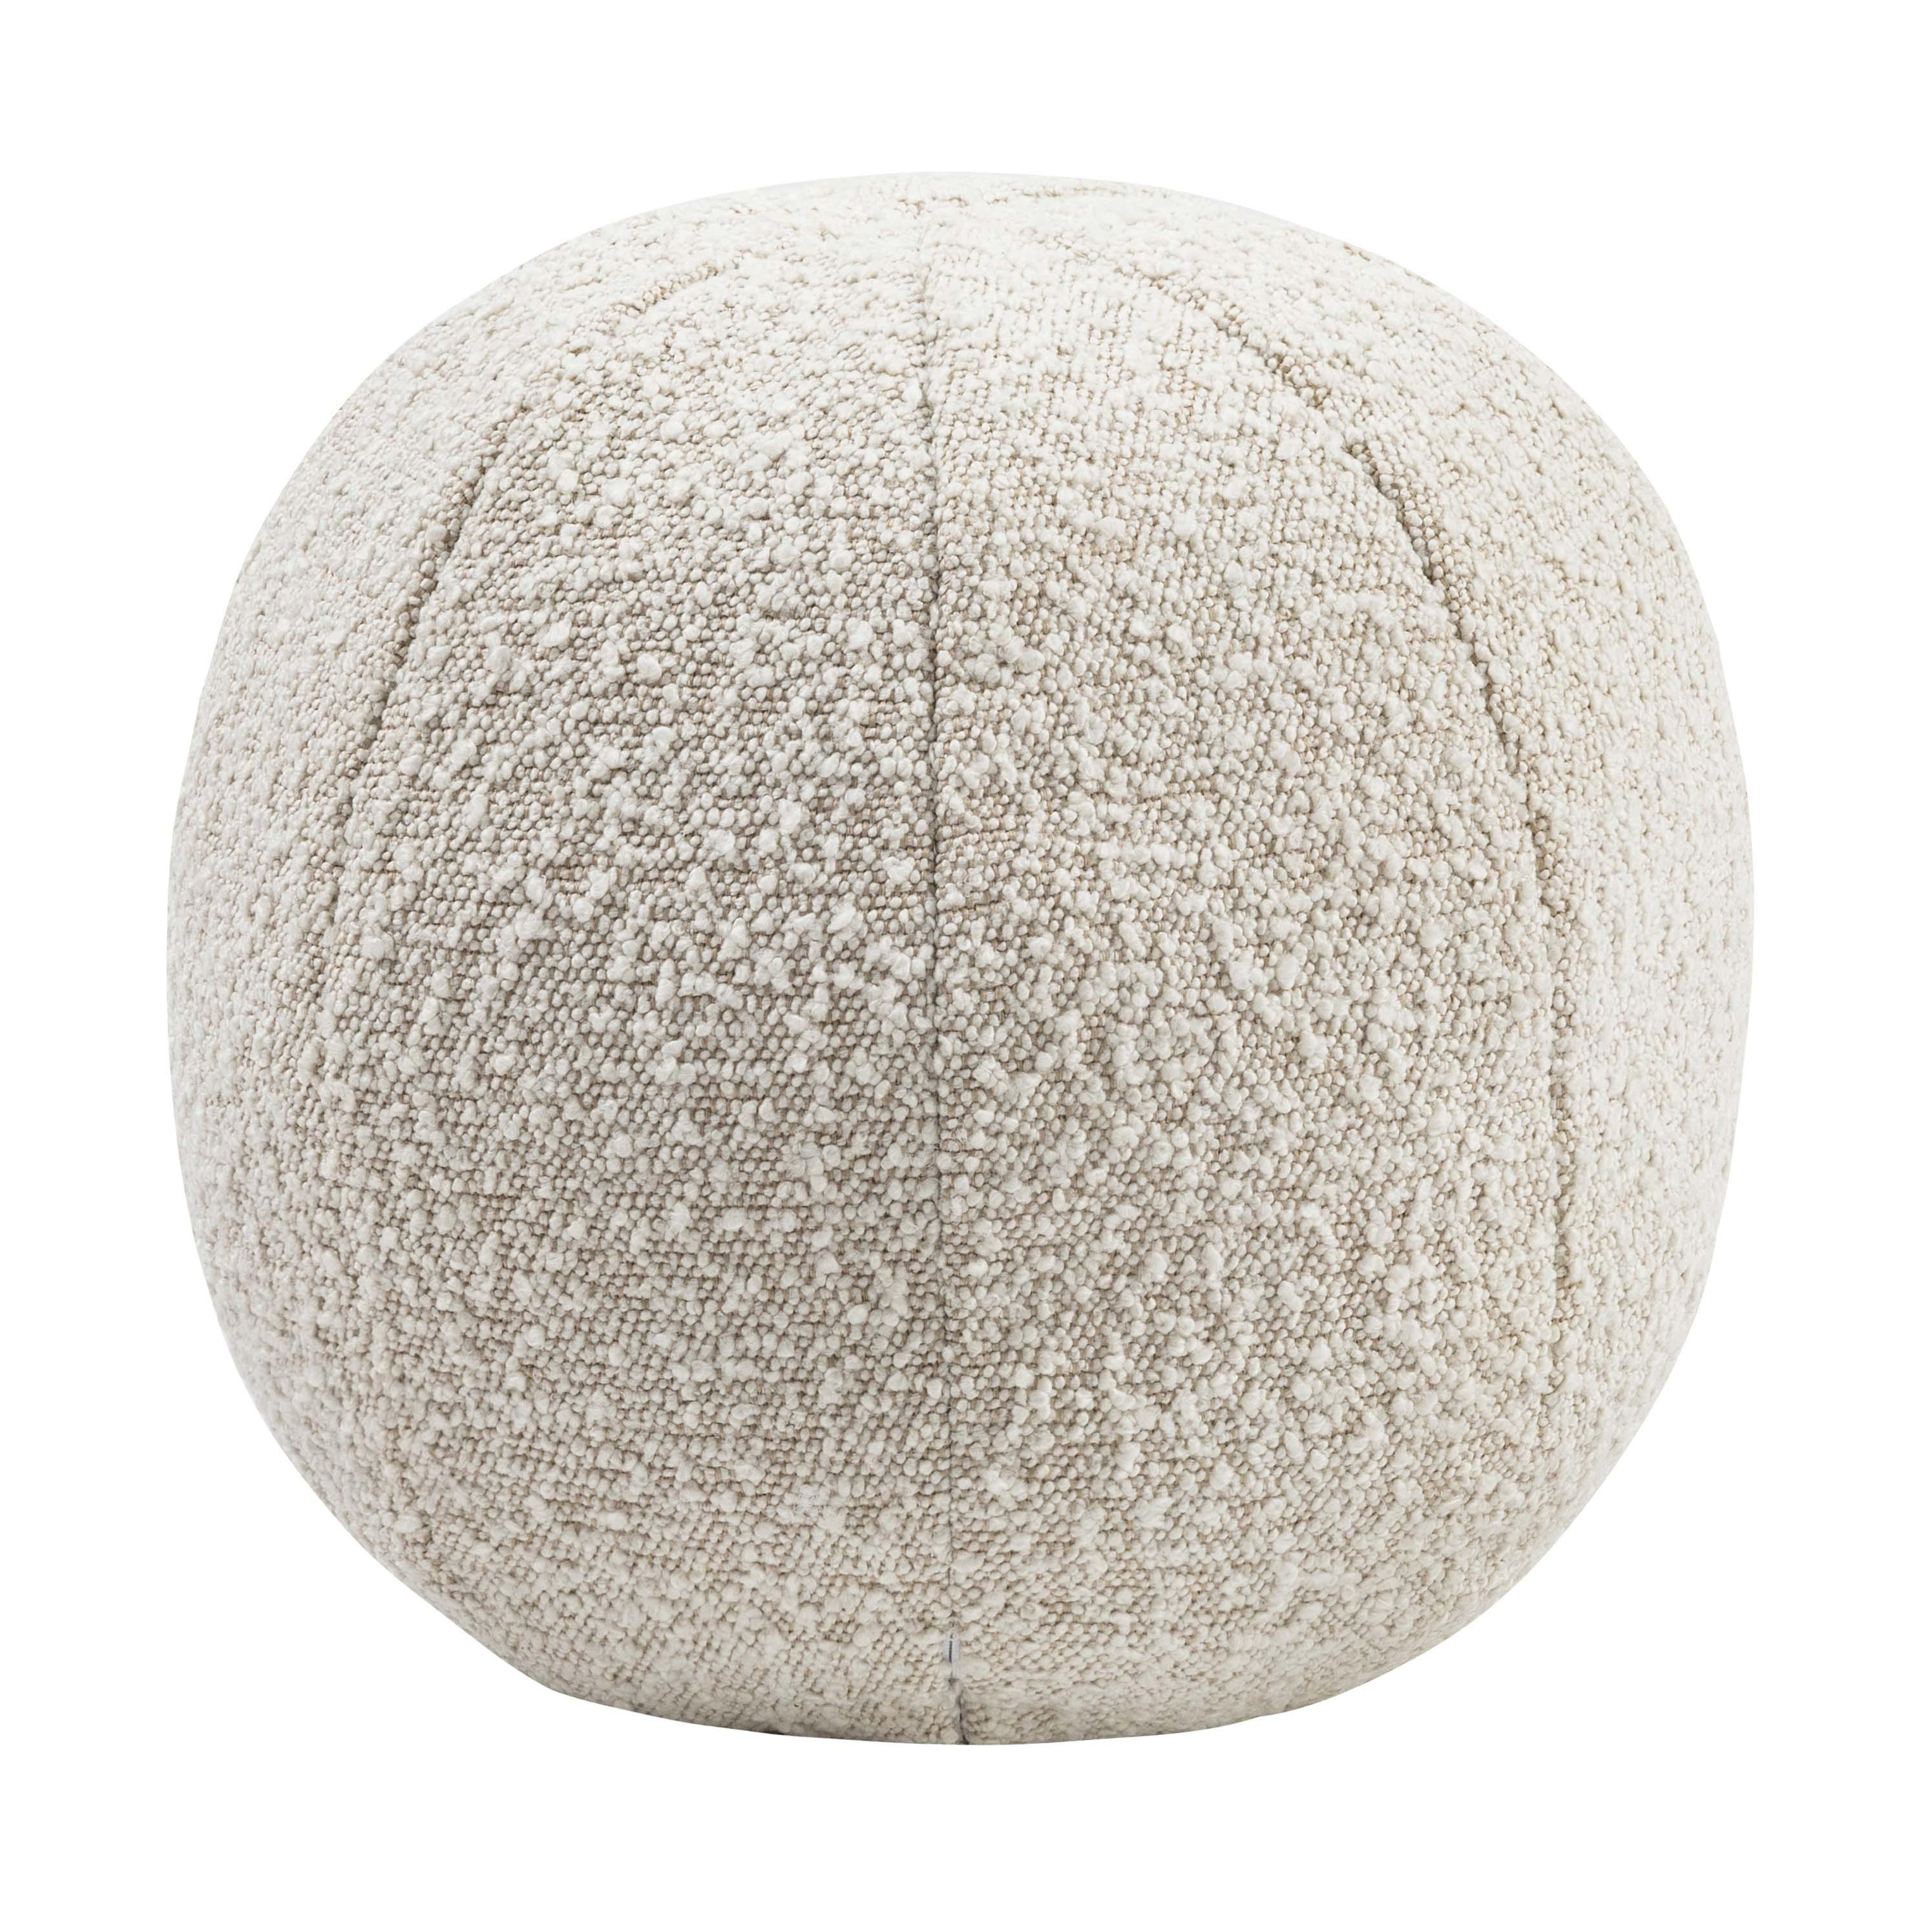 Tov Furniture Pillows - Boba 14 Inch Beige Boucle Pillow